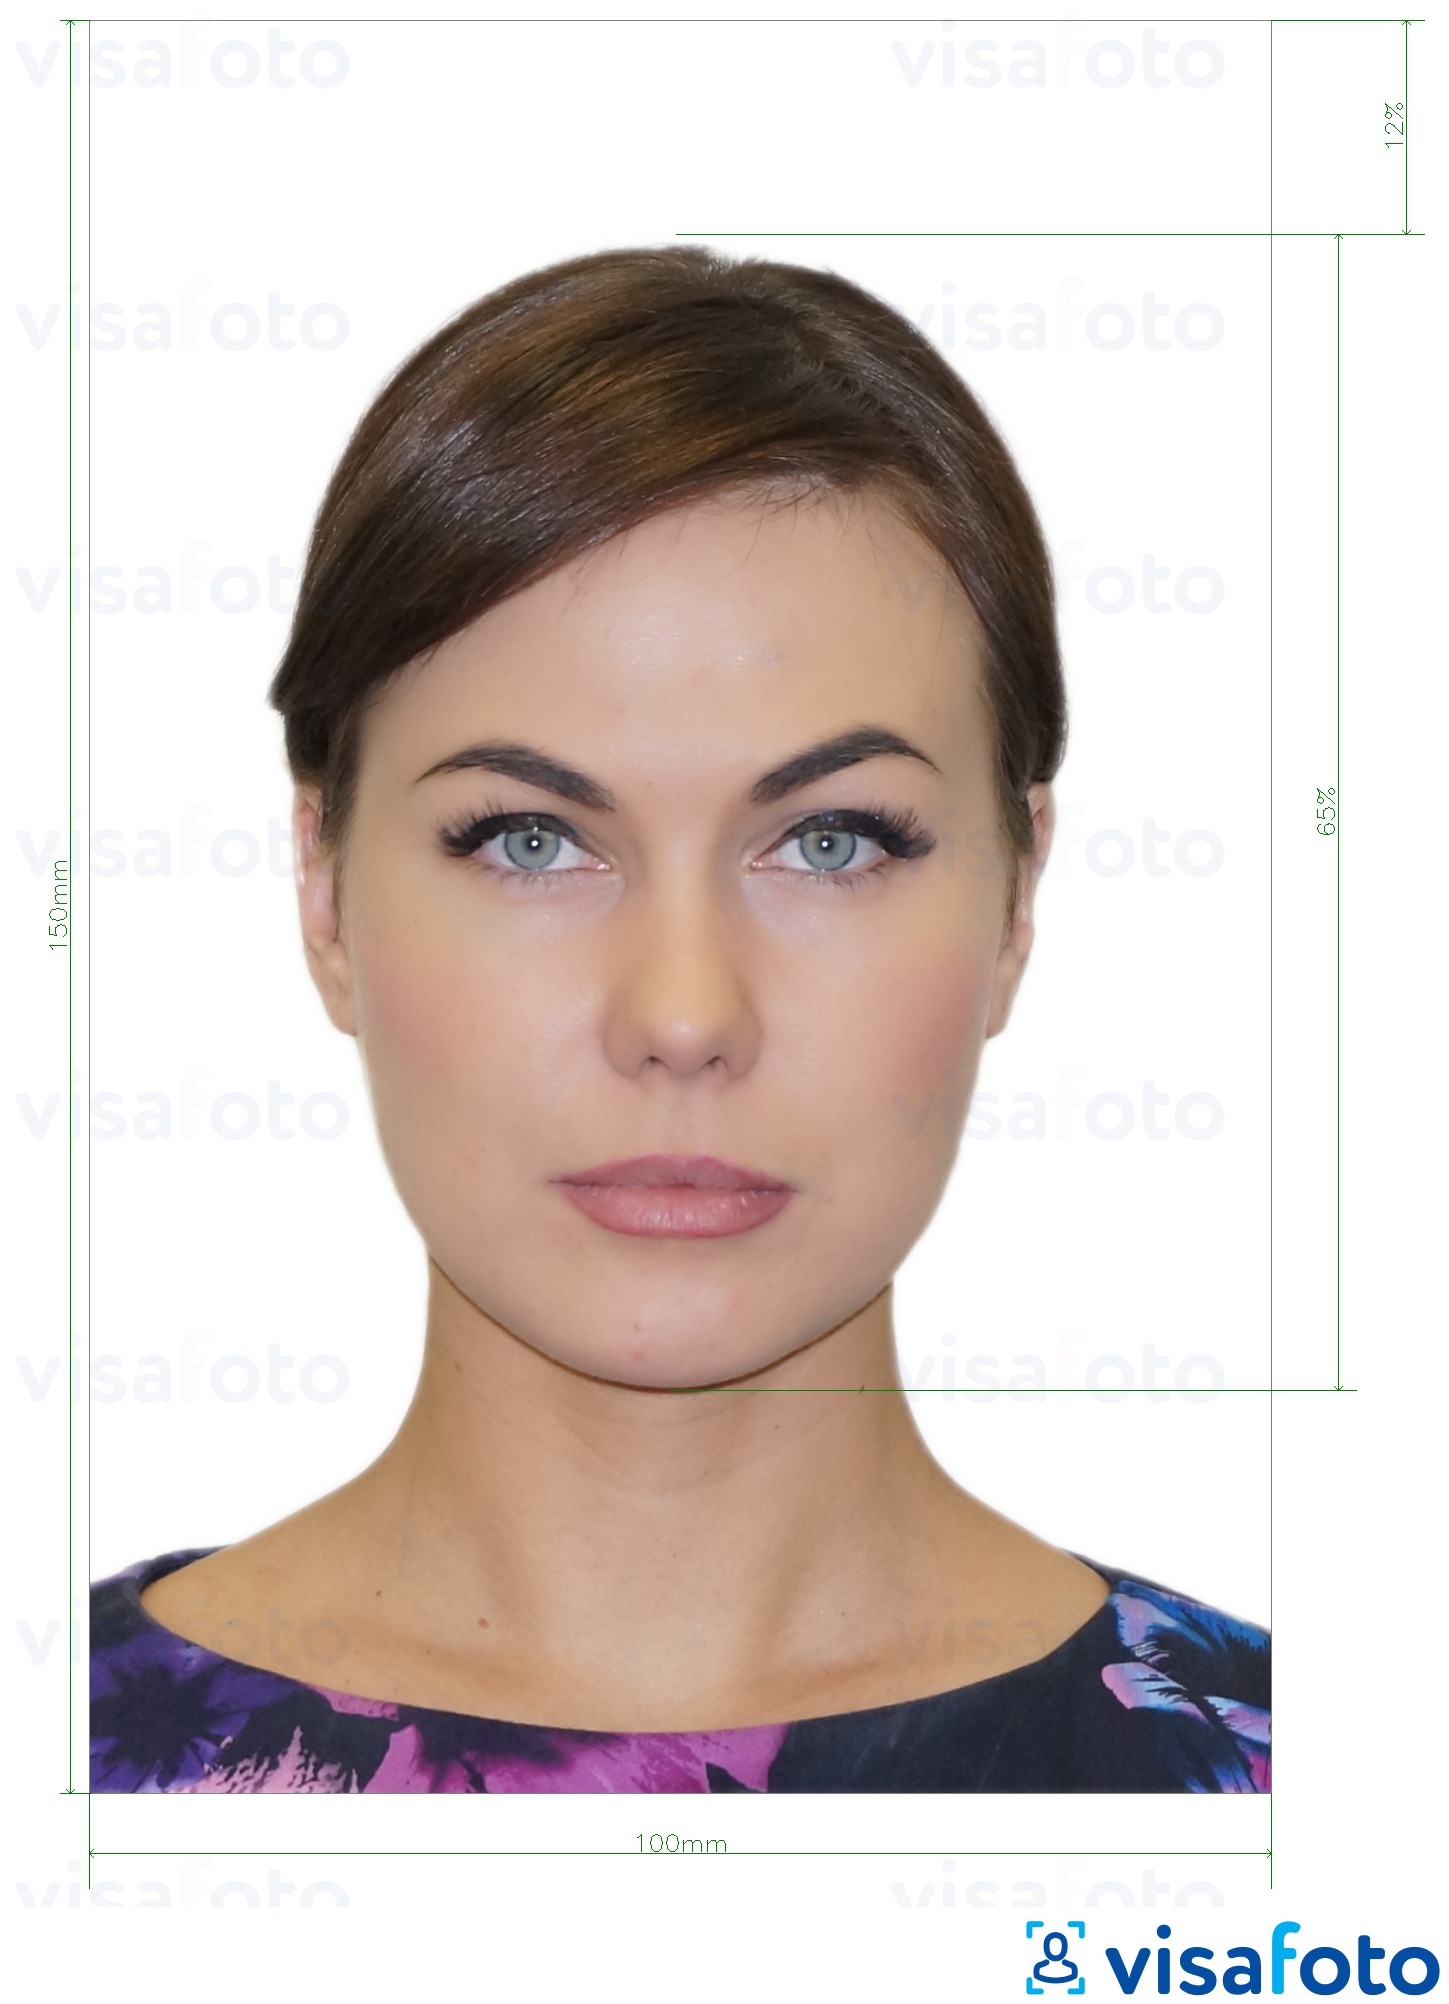 Example of photo for Moldova ID card (Buletin de identitate) 10x15 cm with exact size specification